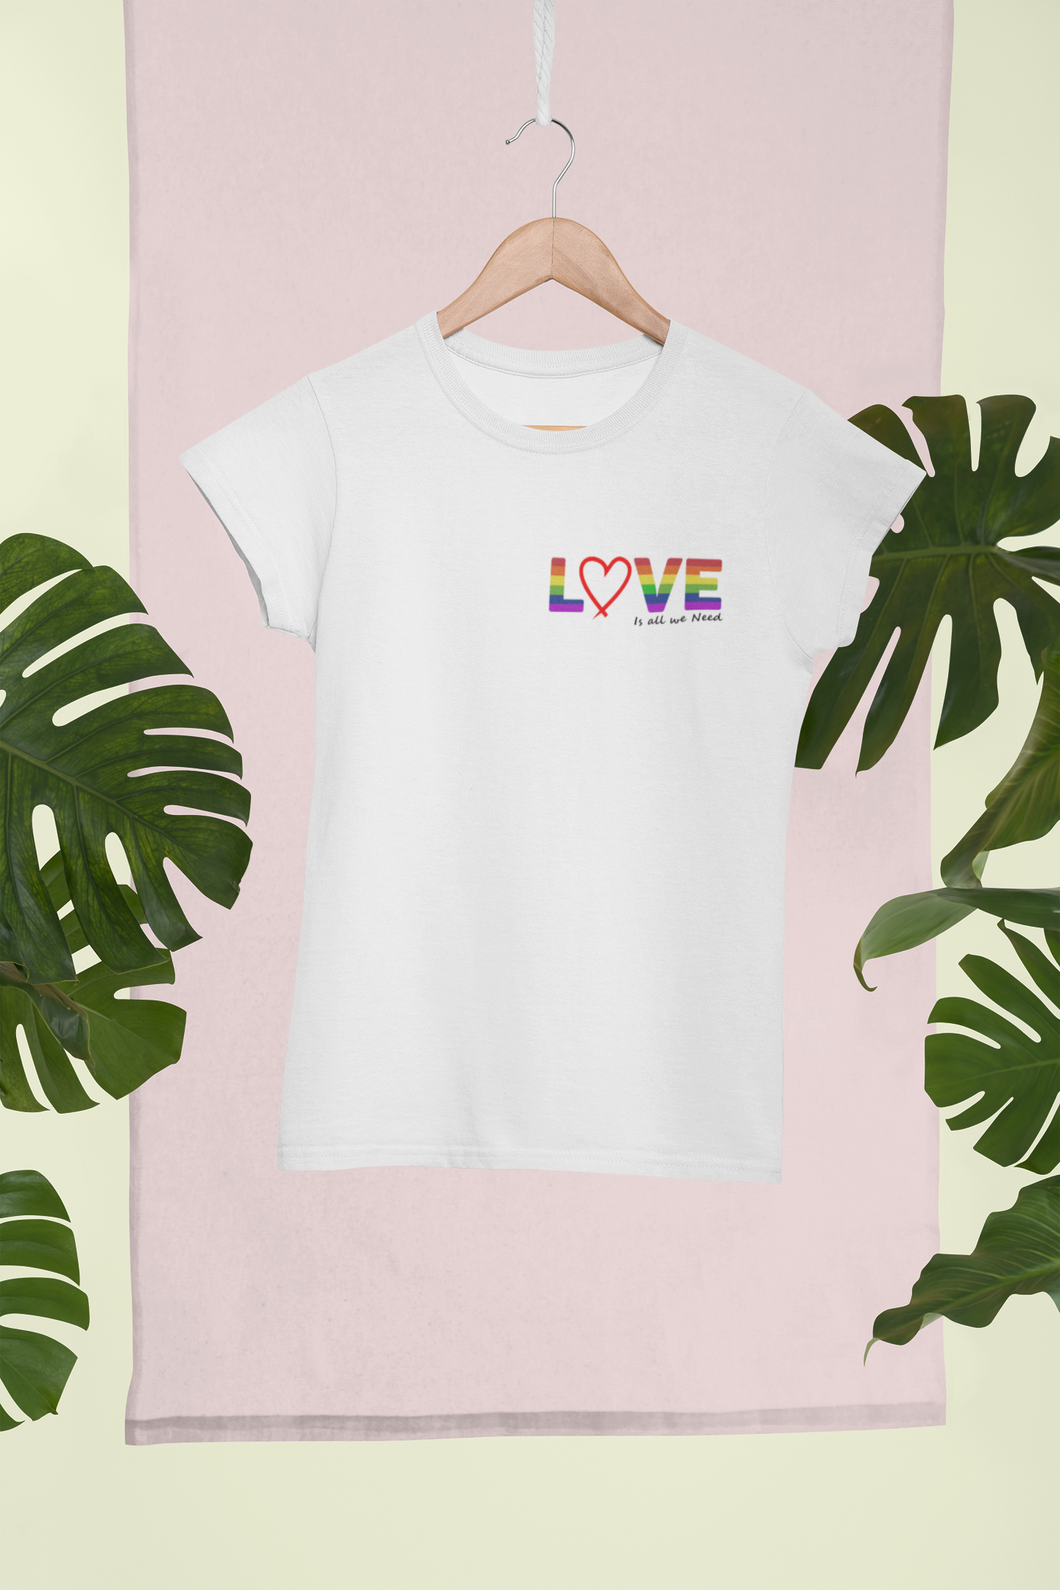 LOVE is all we need - Women's  T-Shirt